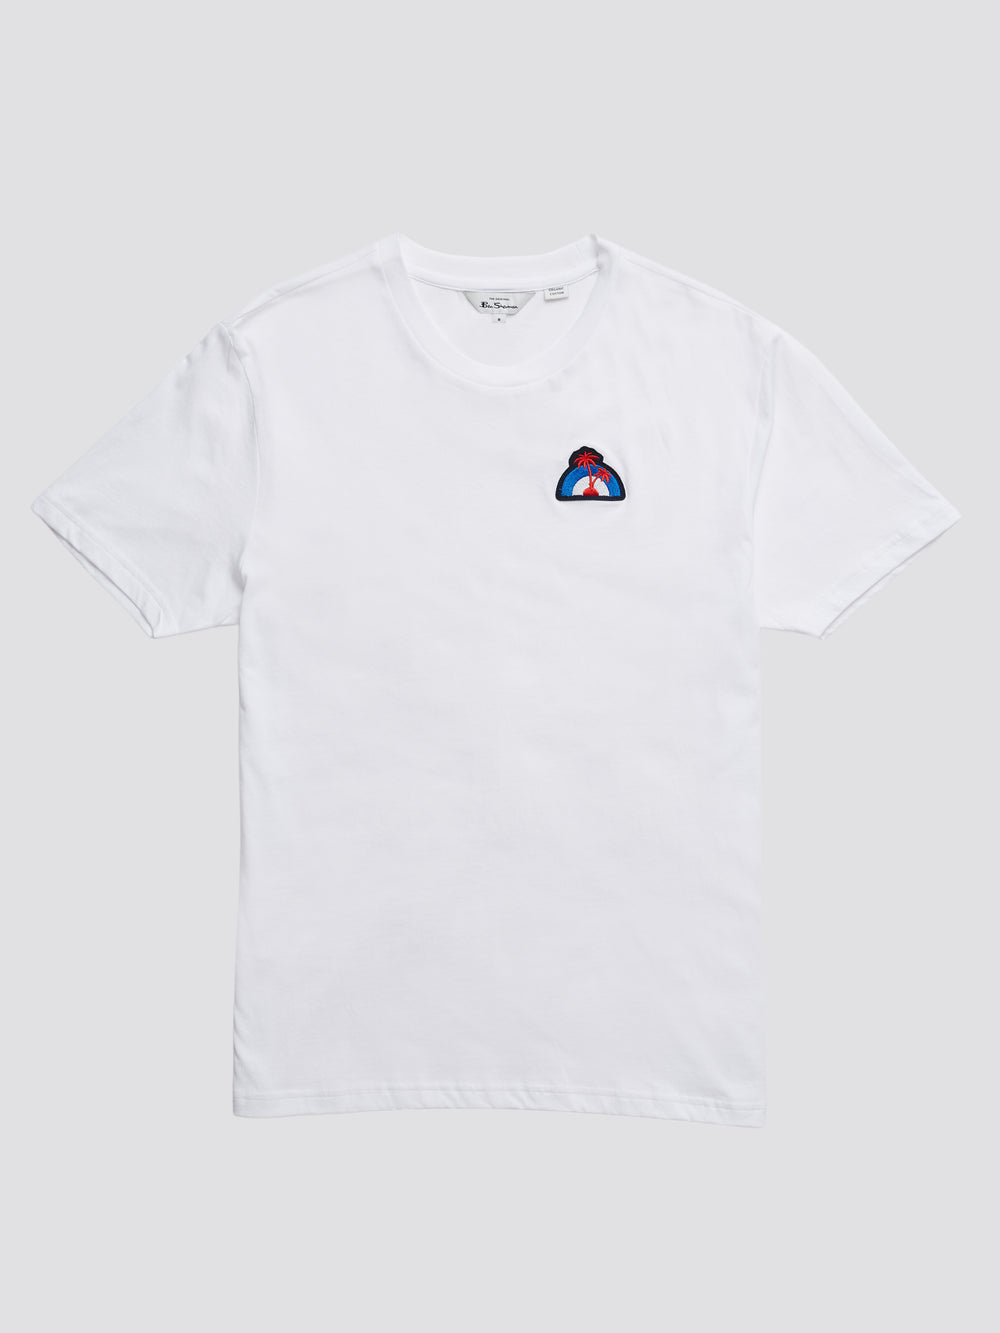 Palm Logo Embroidered Graphic Tee